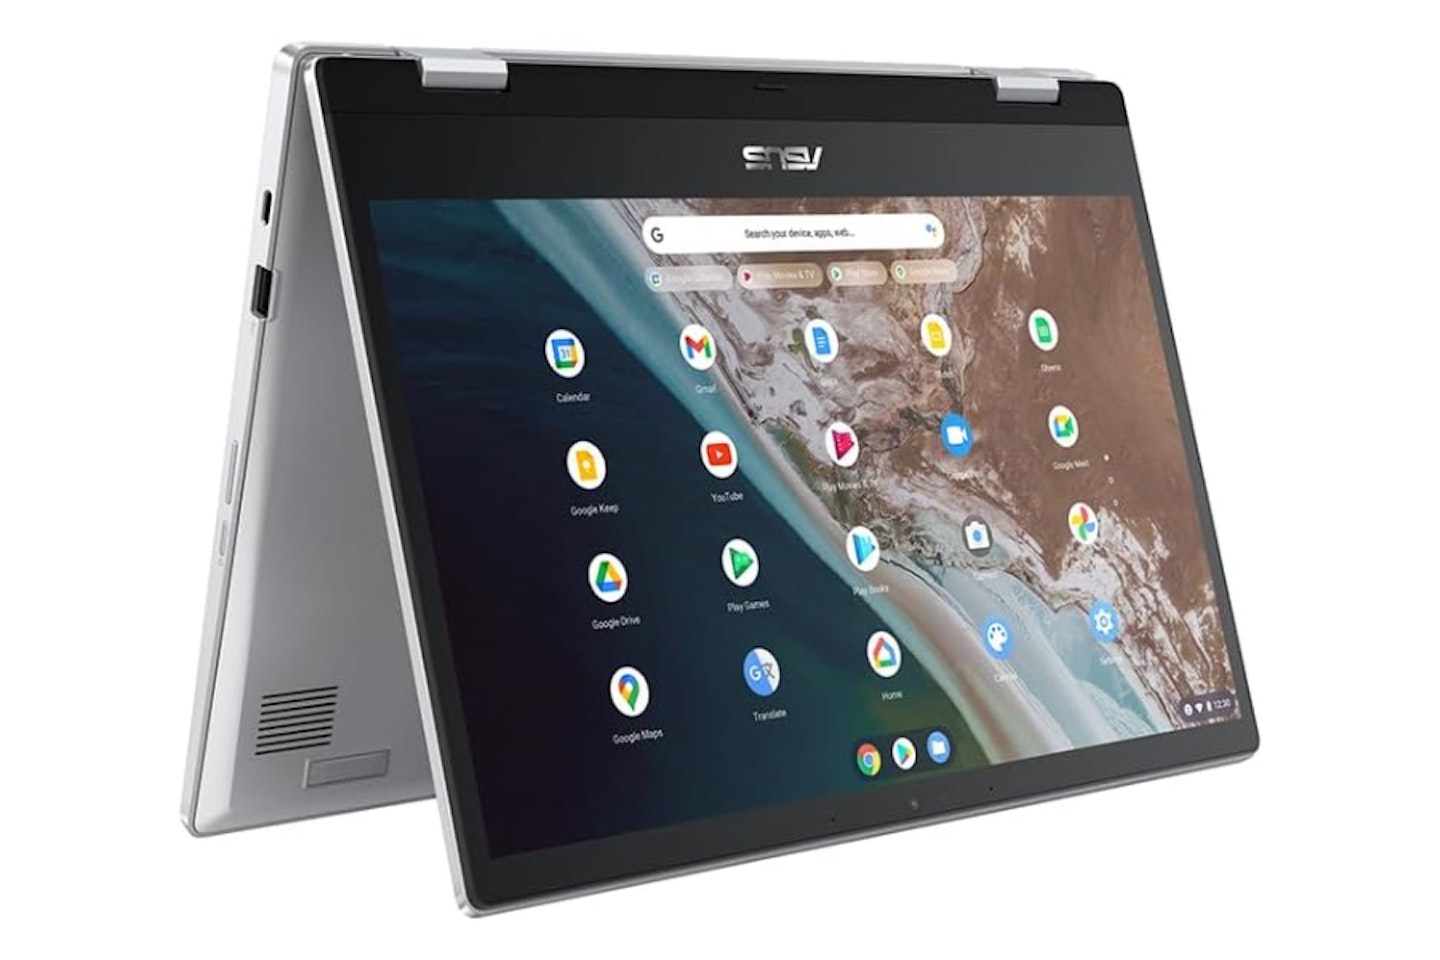  ASUS Chromebook Flip CX1400FKA - possibly the best laptop with touchscreen